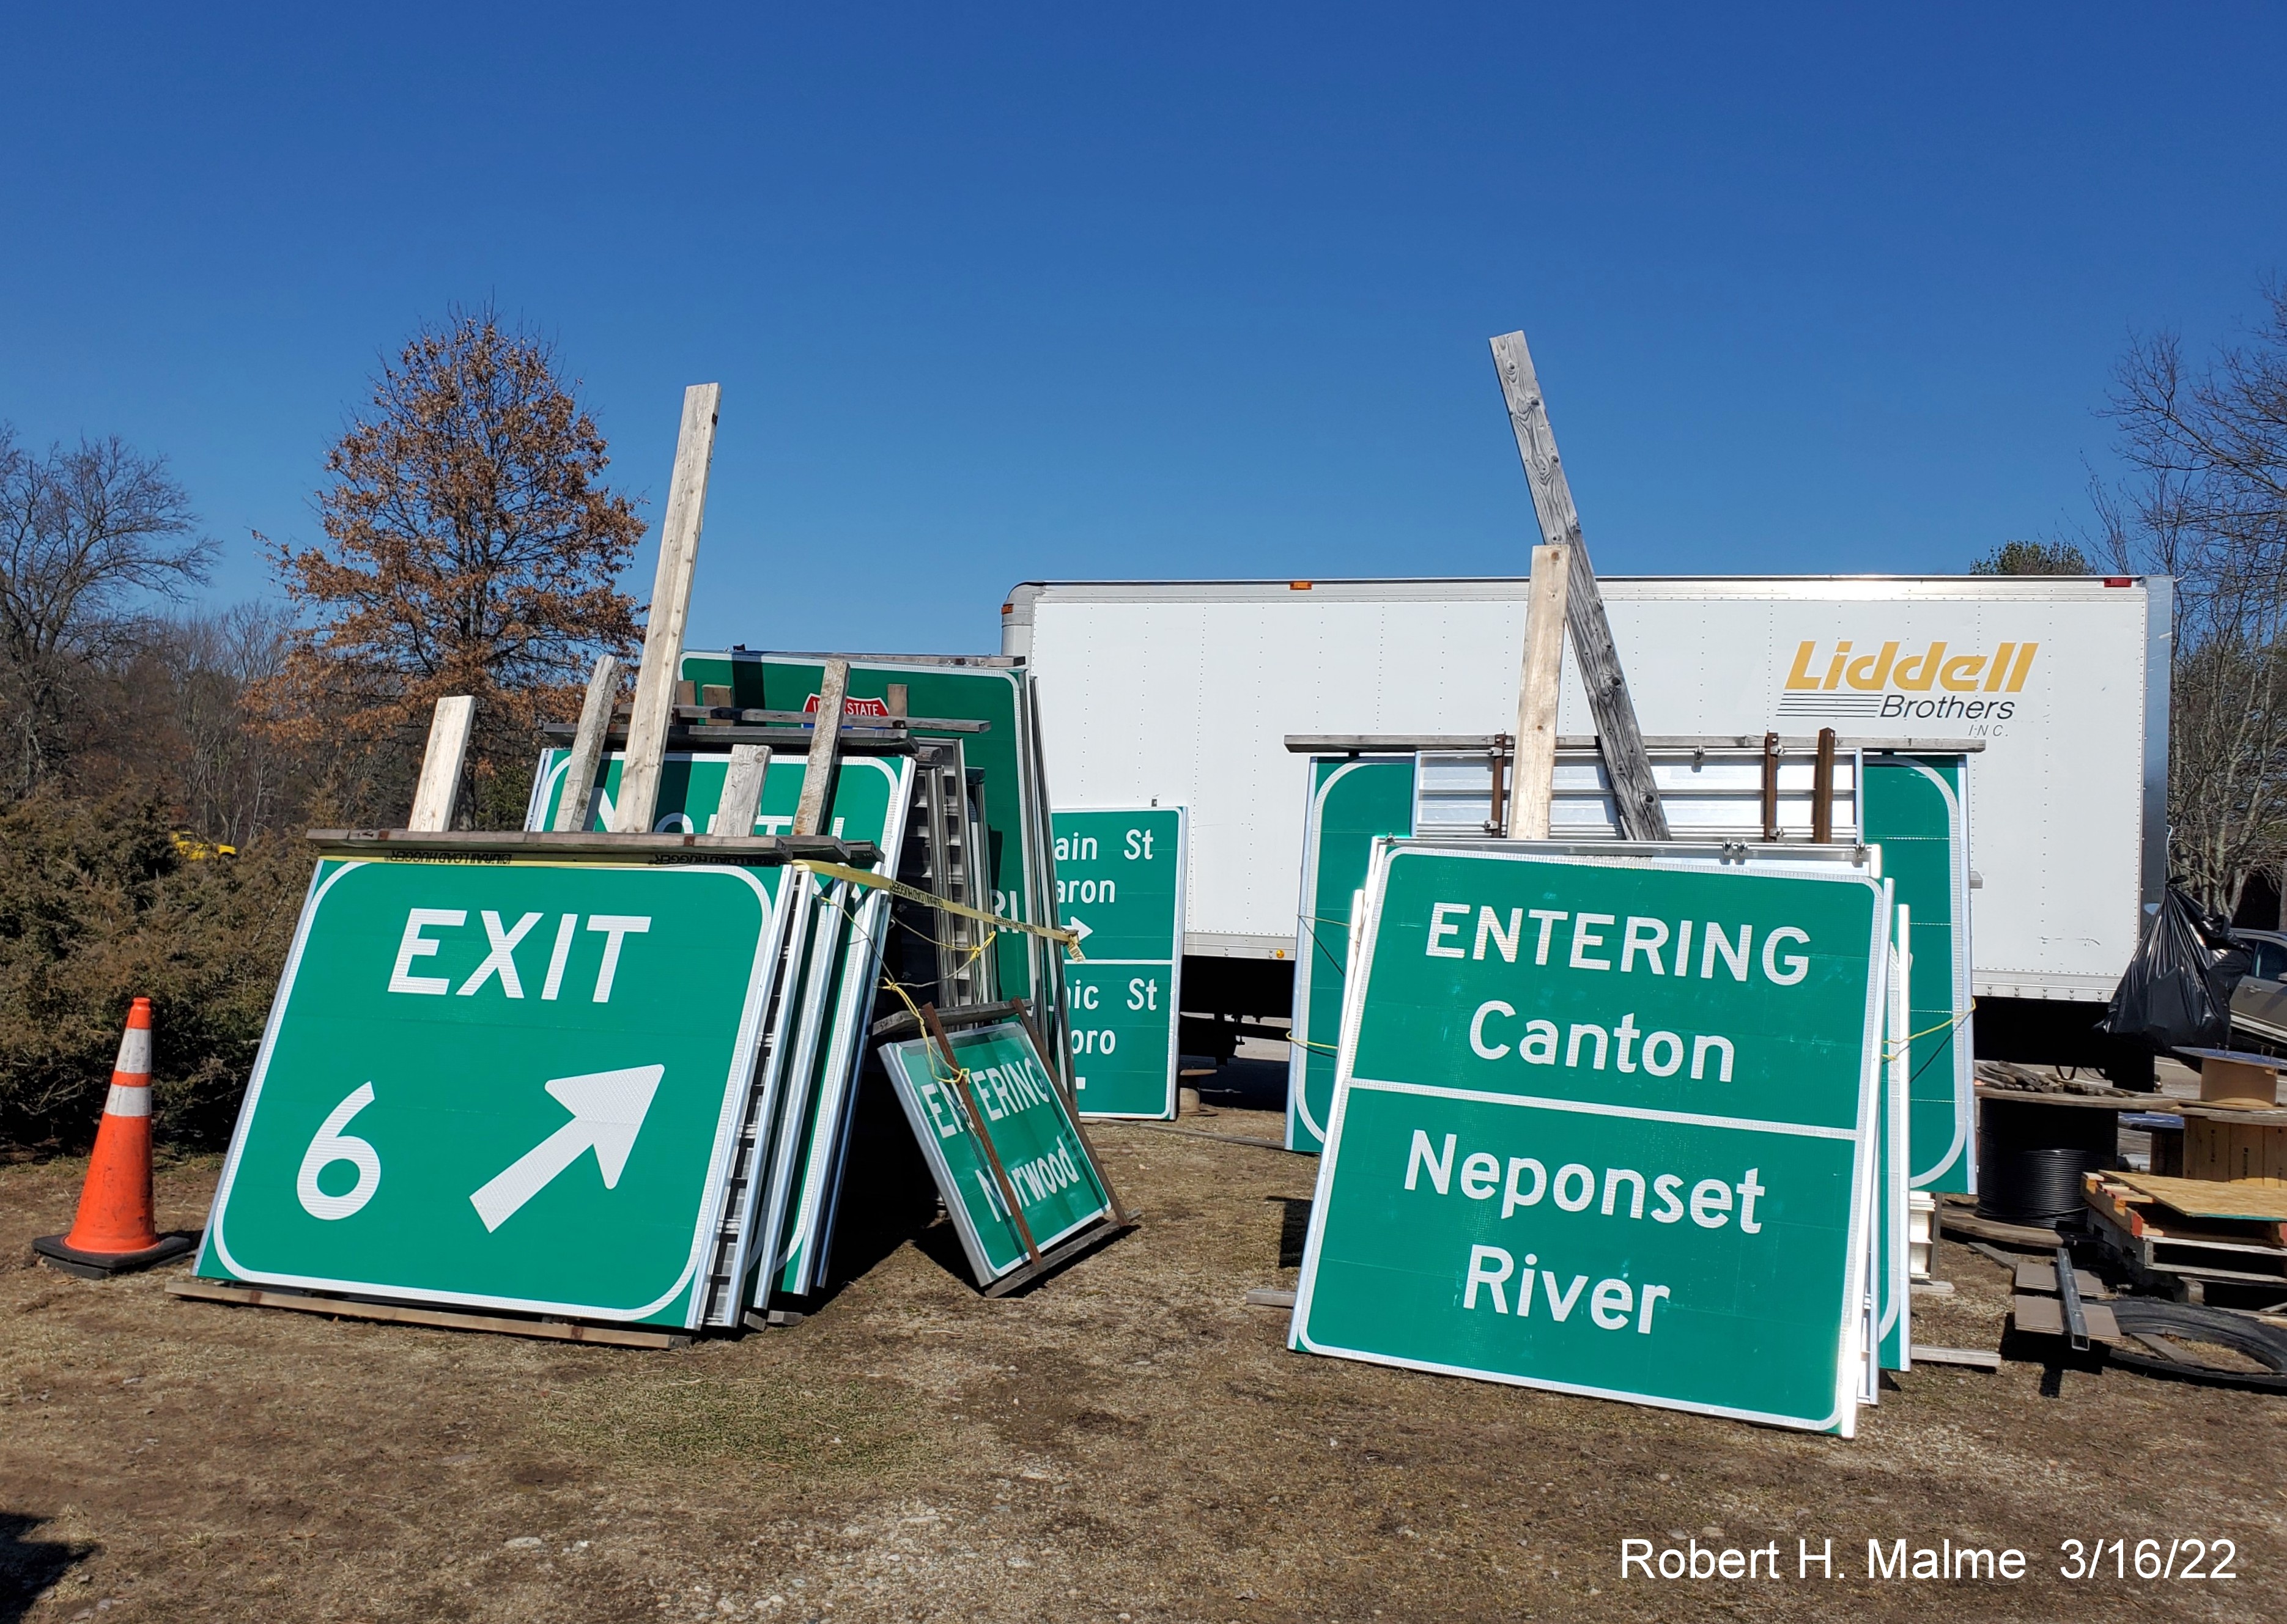 Image of a ground mounted signs for I-95 Sign Replacement Project being stored at Mansfield Rest Area, March 2022